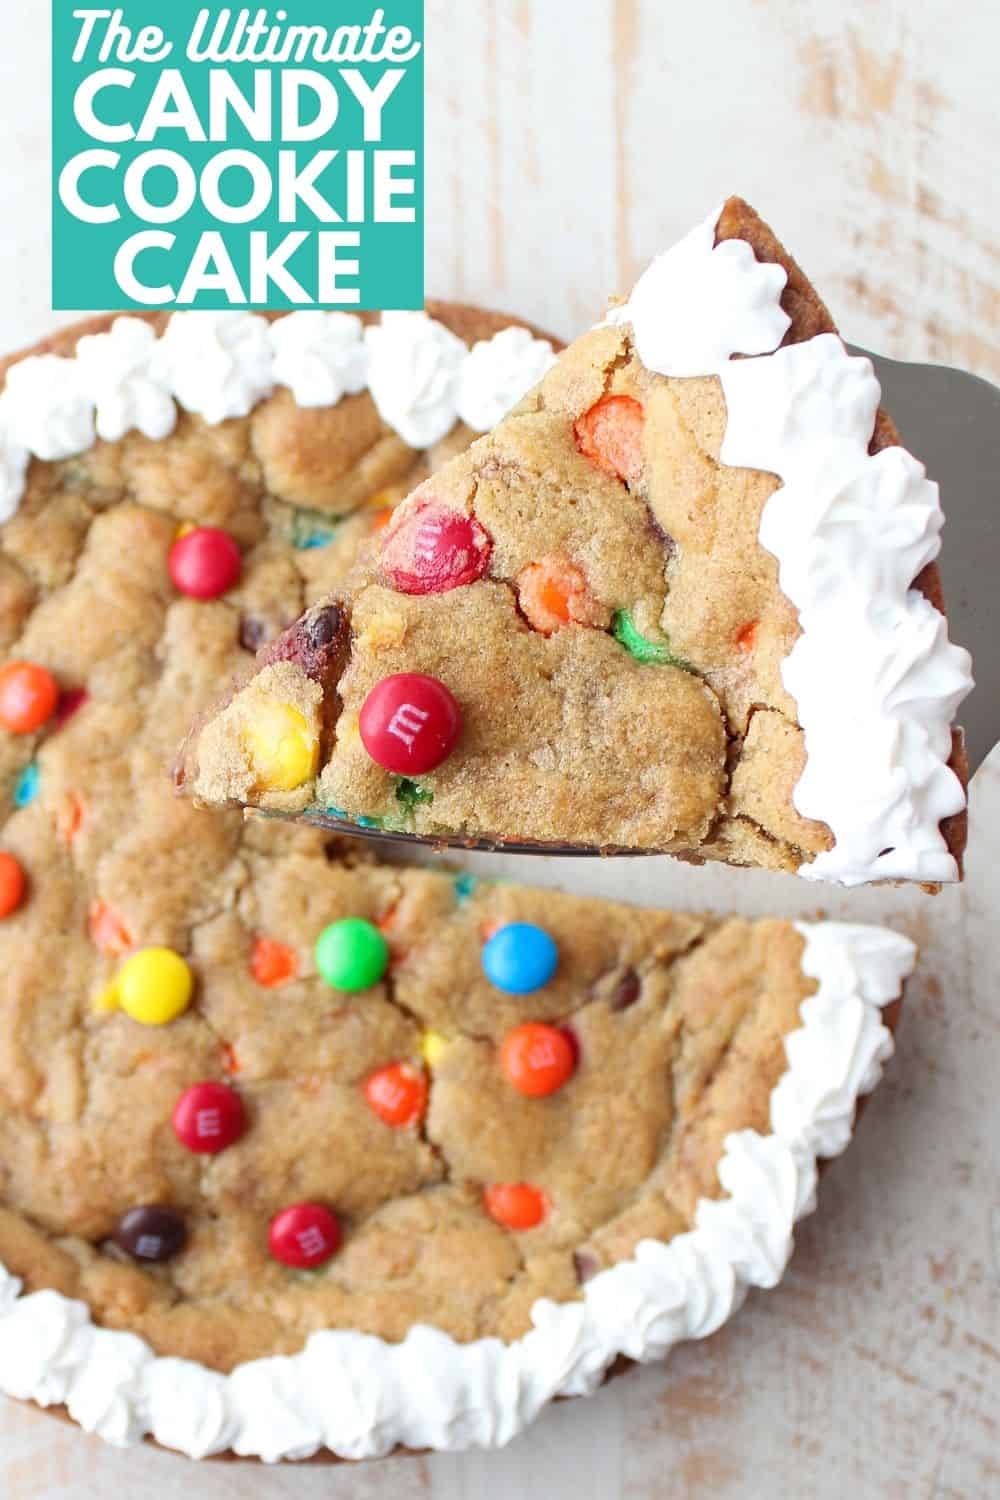 The Ultimate Candy Cookie Cake Recipe - WhitneyBond.com